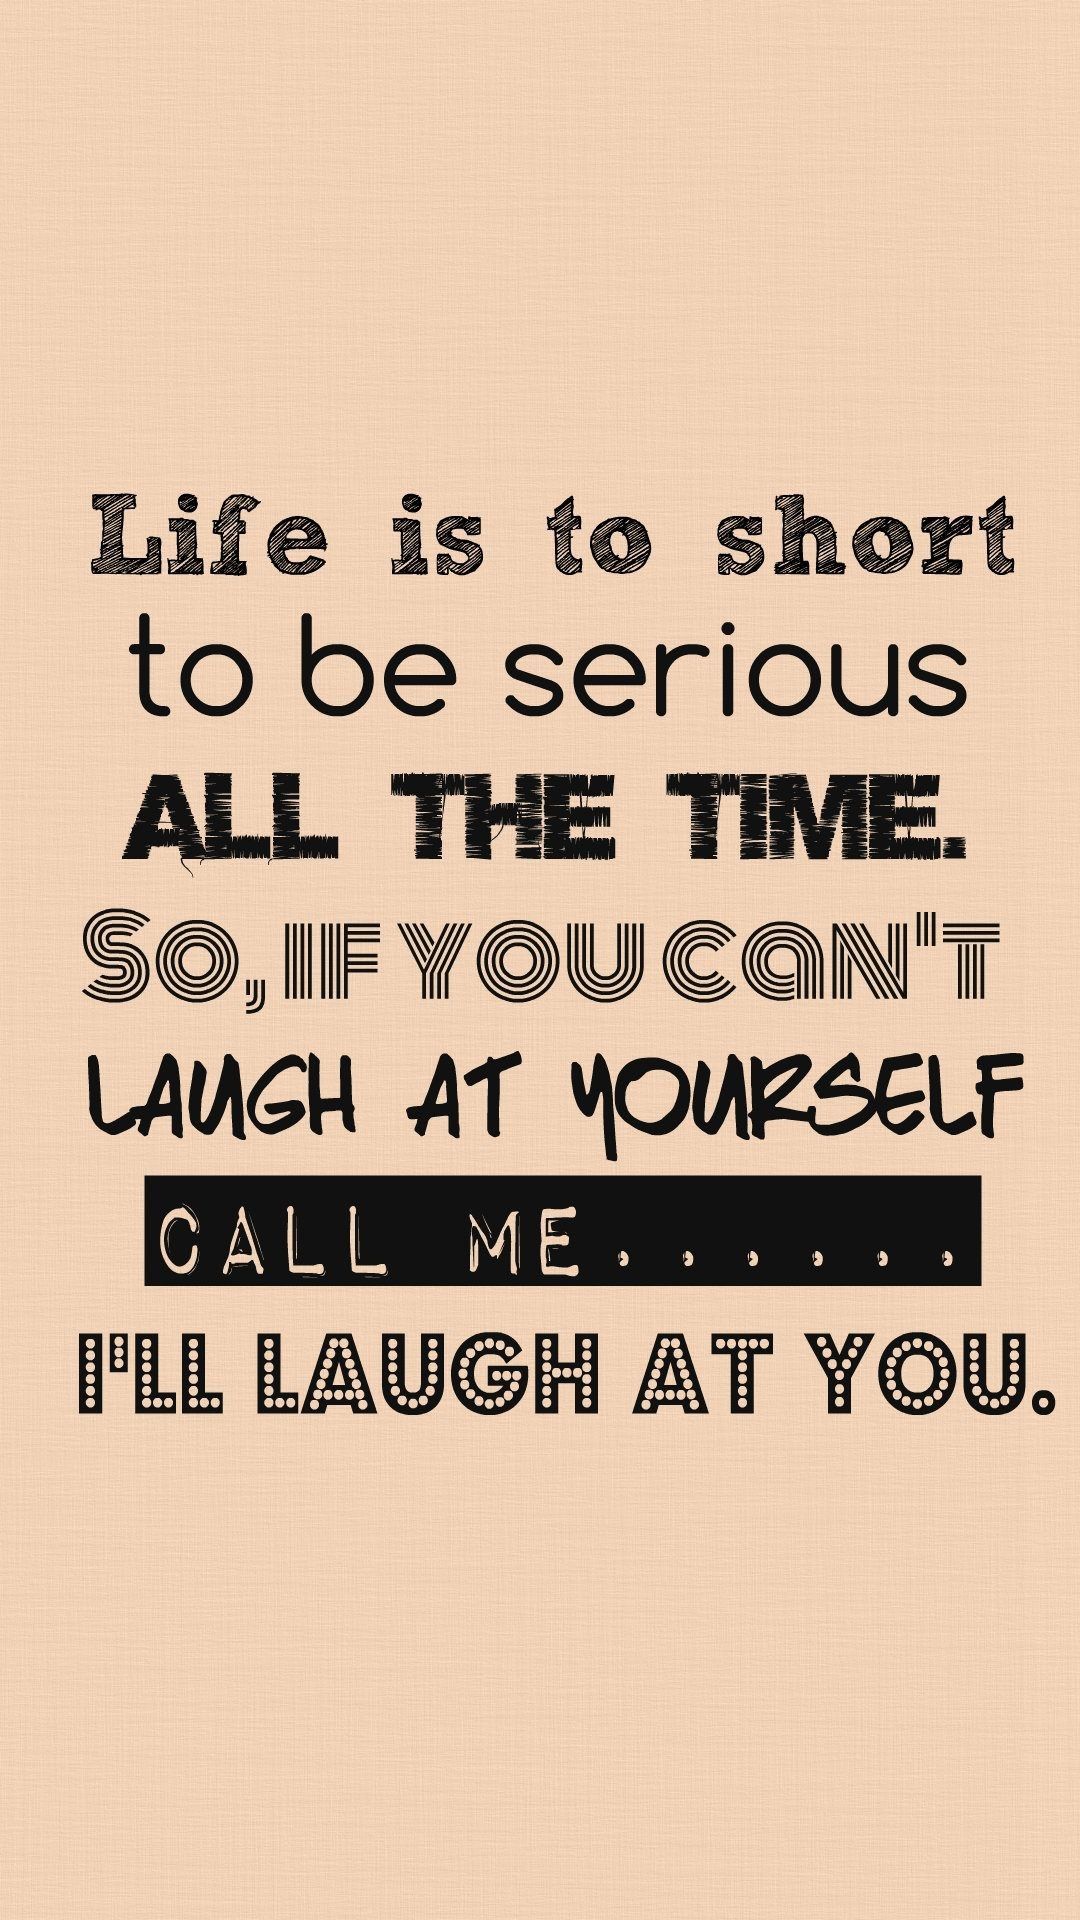 Life Ts To Short. iPhone wallpaper quotes funny, Inspirational quotes wallpaper, Funny inspirational quotes